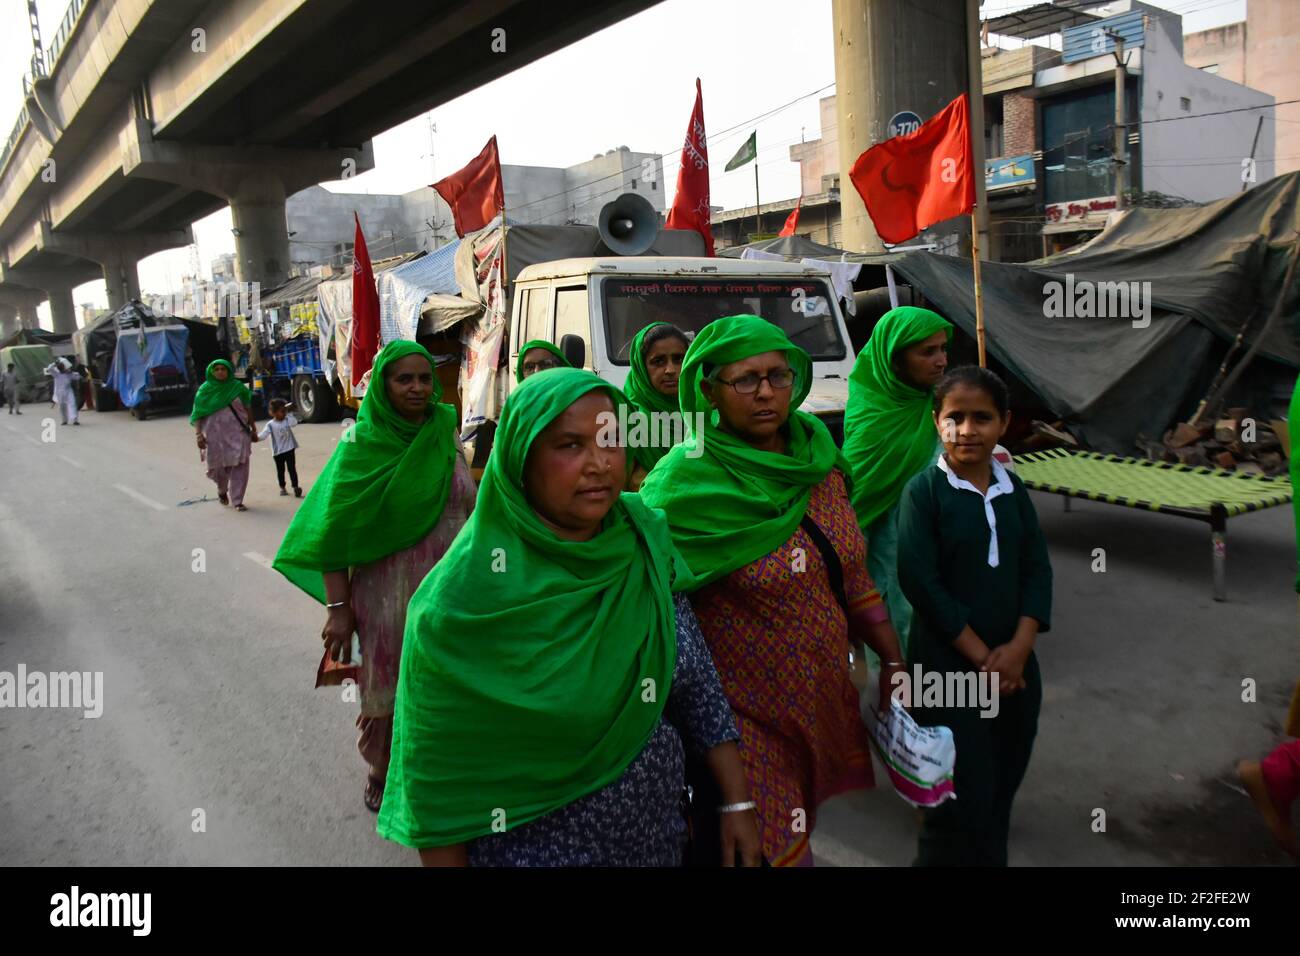 March 8, 2021: New Delhi, India. 08 March 2021. Female farmers join a farmers' protest at the Tikri border near New Delhi against the government's new farm laws, on International Women's Day. Thousands of women have joined the farmers' protests around Delhi on International Women's Day demanding the scrapping of the three farm bills passed by the Parliament of India in September 2020. Farmers and their families, as well as farmers unions, have been protesting for months to have the new agricultural laws repealed as they think they would open up the country's farm sector to corporatio Stock Photo